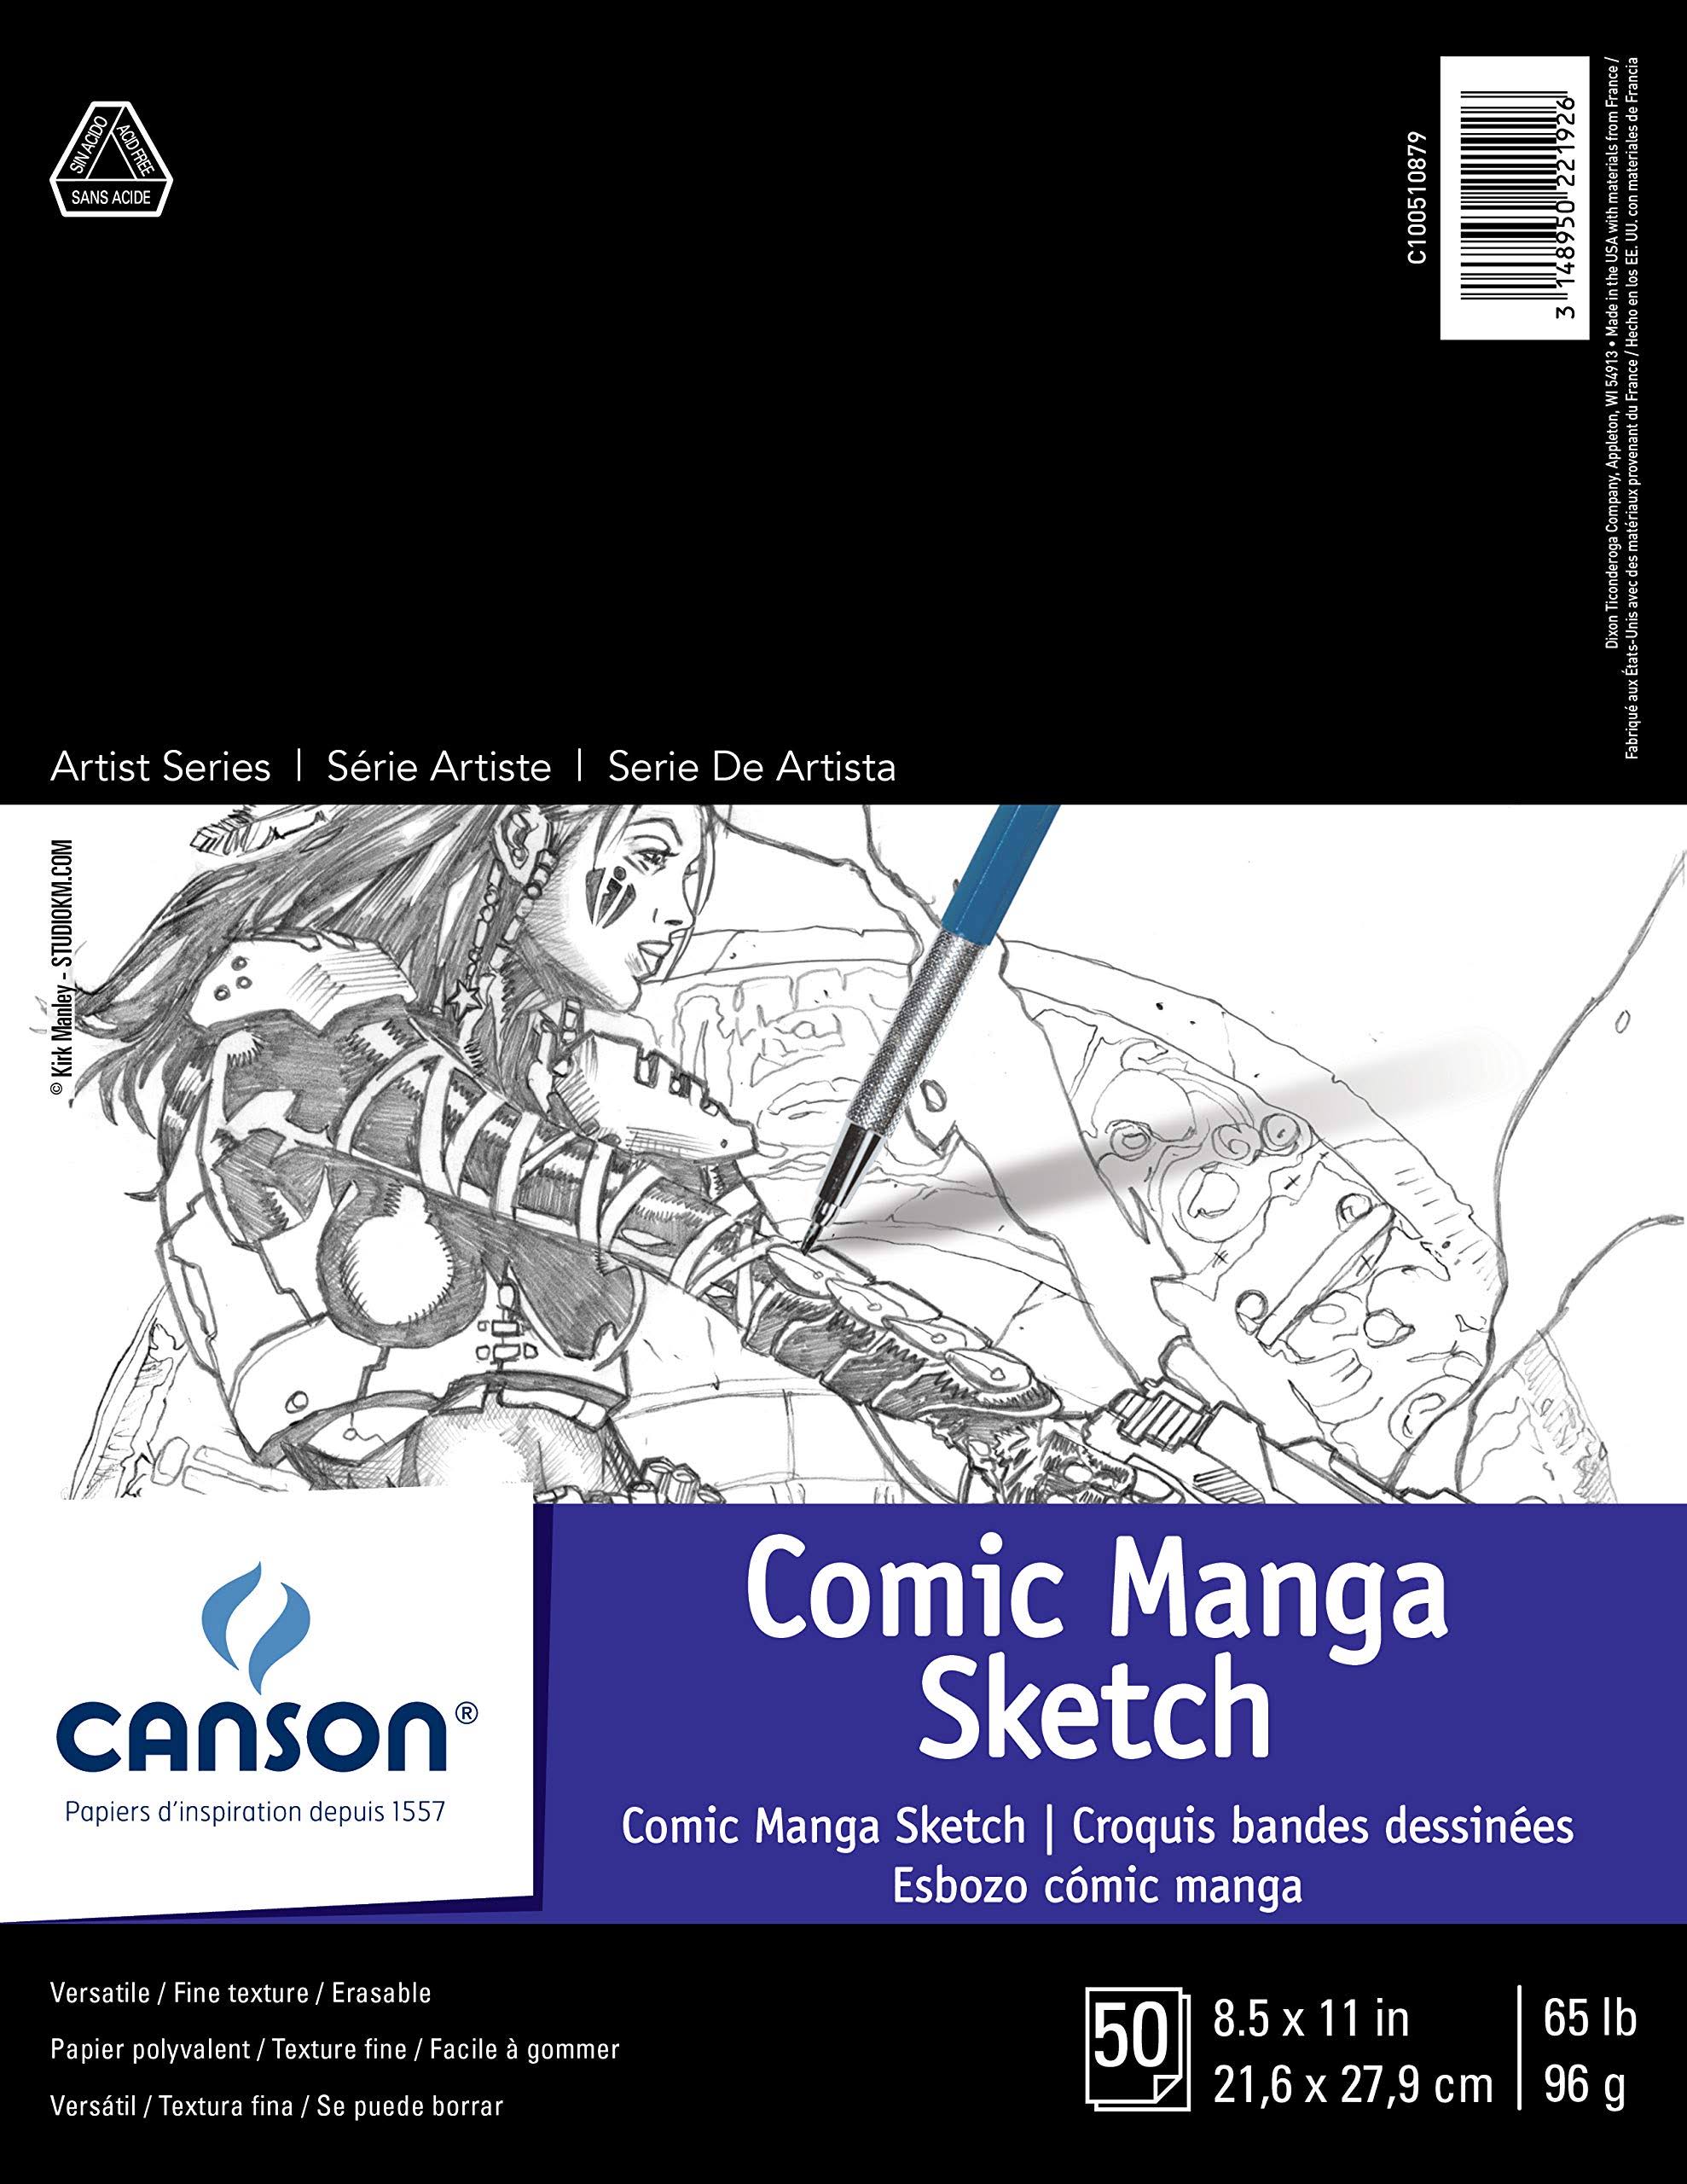 Canson Sketch Pad, 8.5" x 11", Fold-Over Cover, Black, 50 Sheets (100510879)